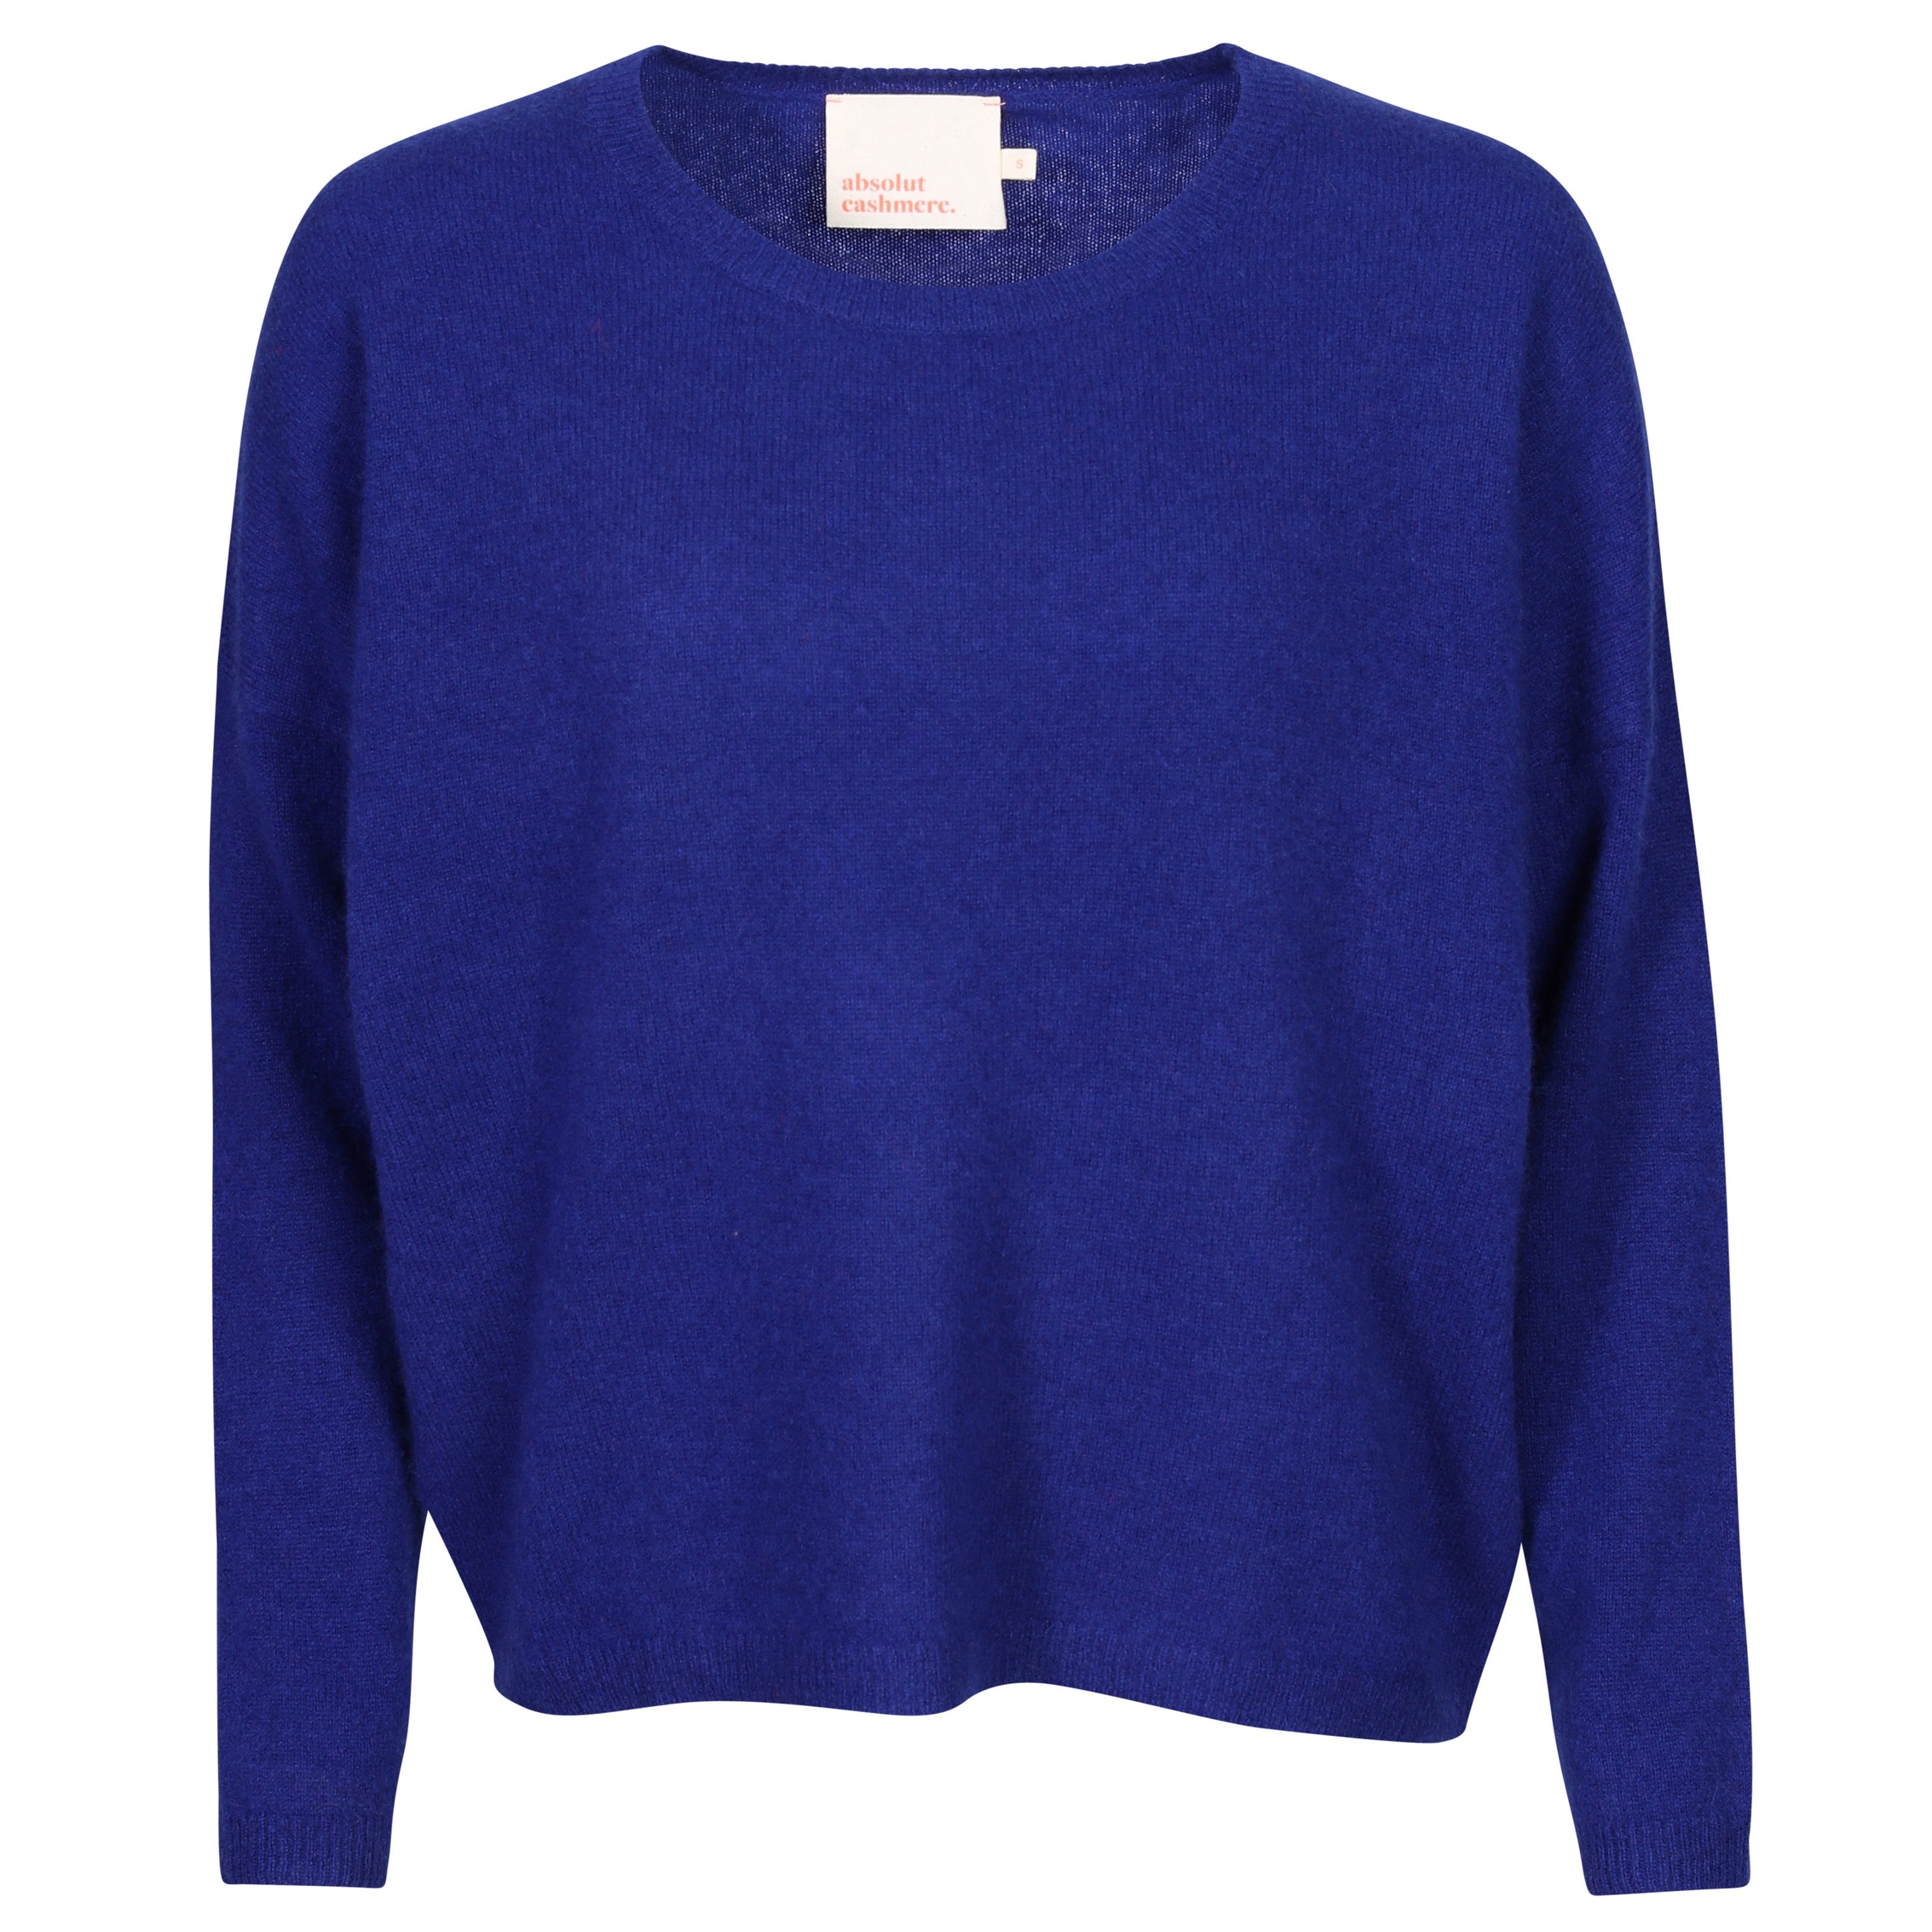 Absolut Cashmere Kaira Cashmere Pullover in Outremer